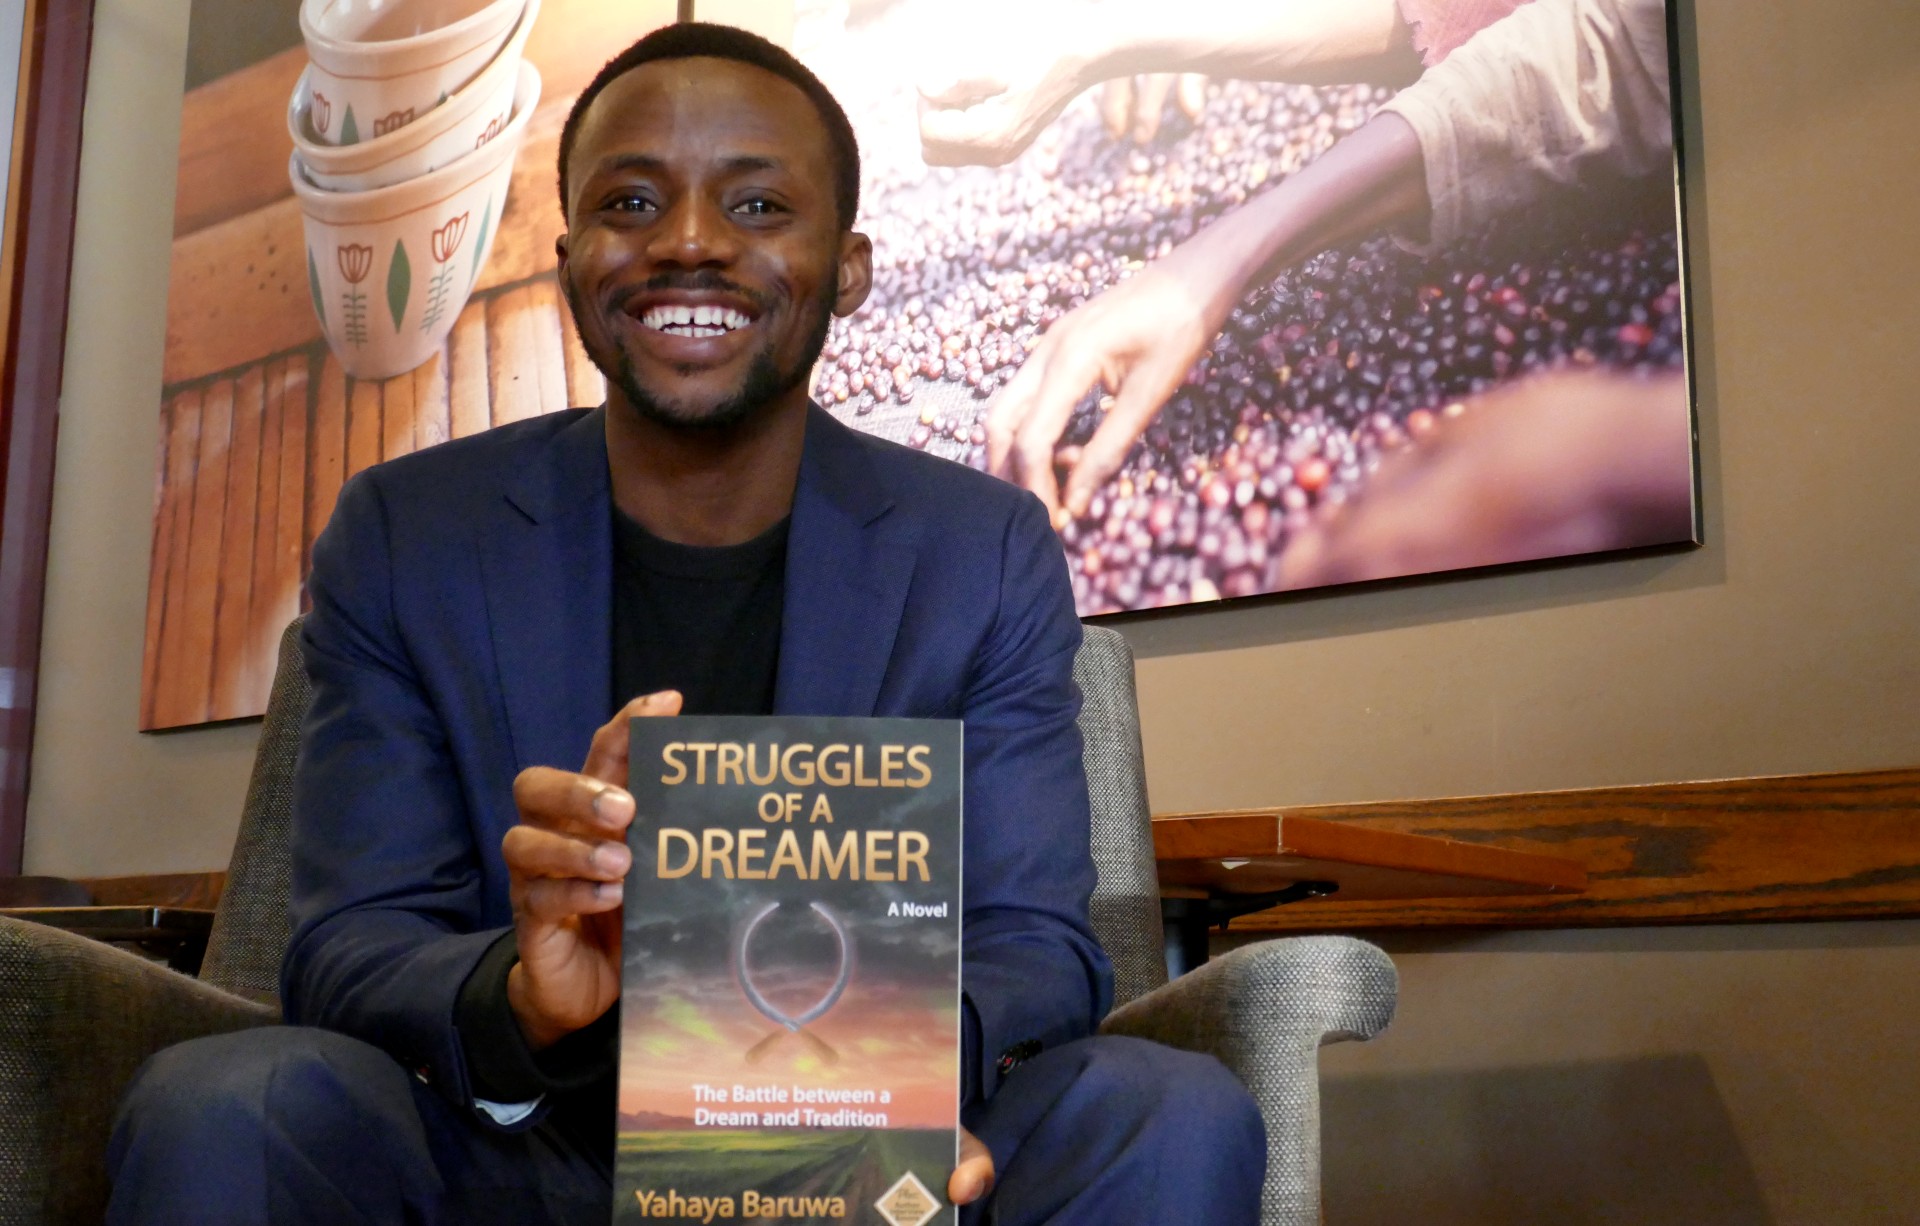 immigrant author Yahaya Baruwa pictured with his book "Struggles of a Dreamer"